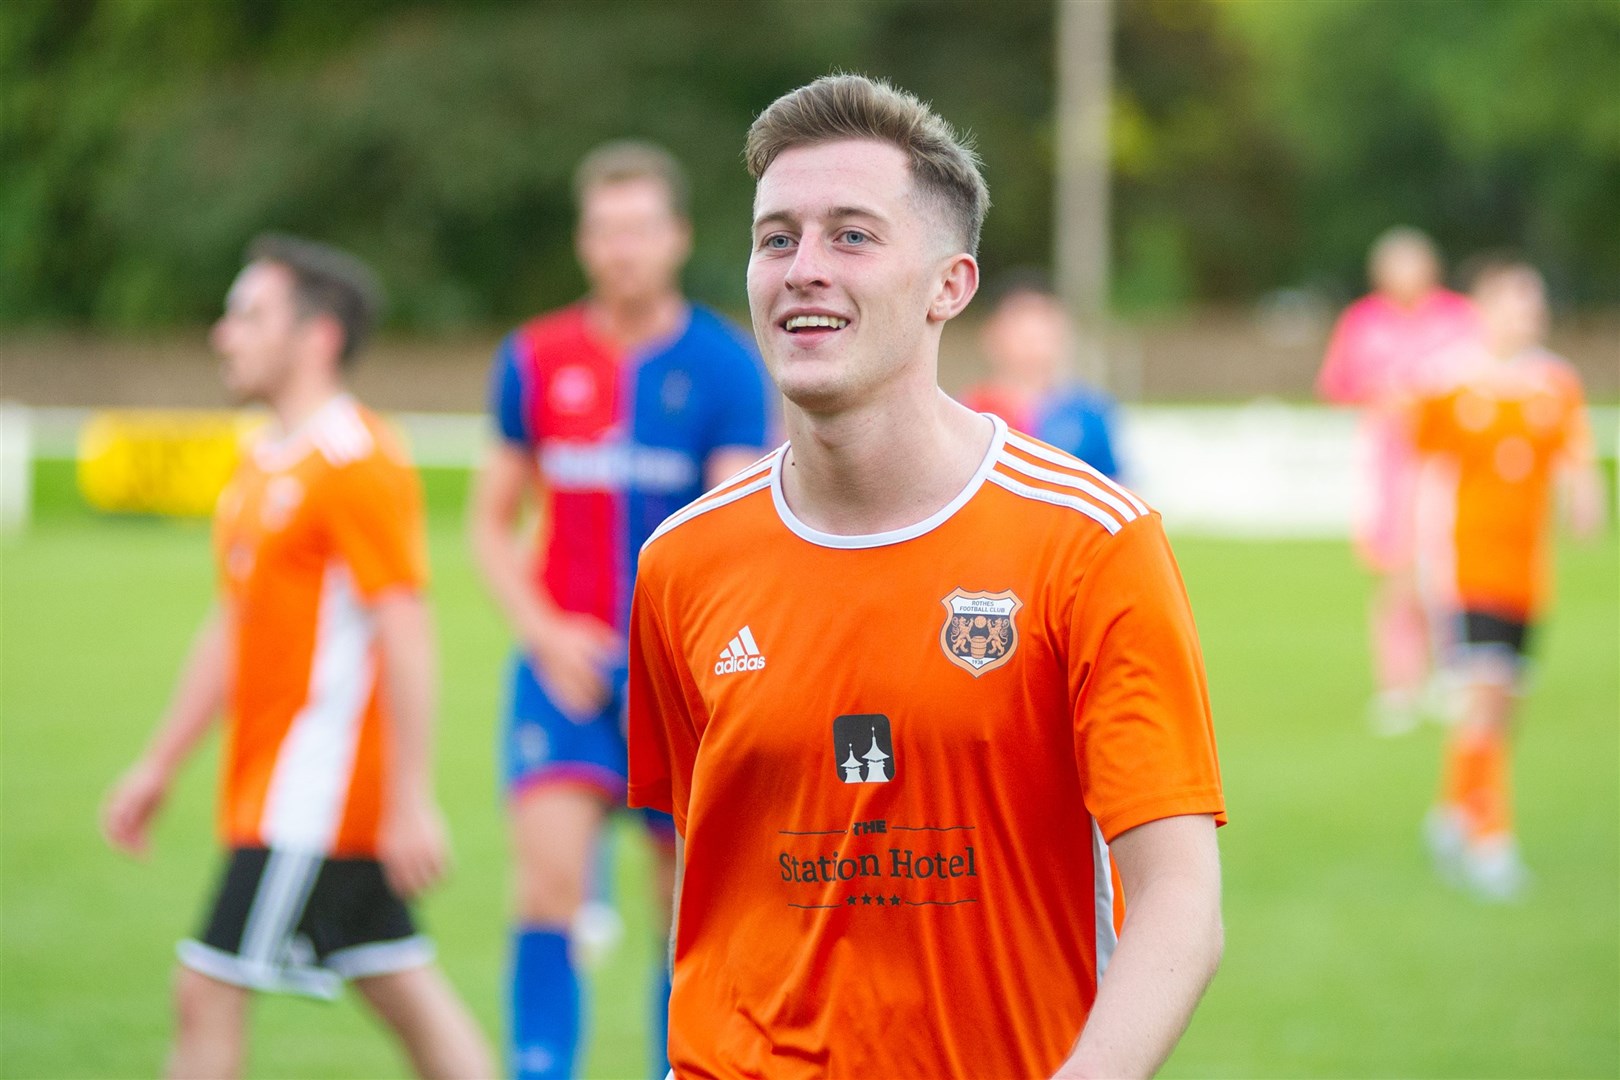 A popular player at Rothes, Dale Wood has been signed by Forres Mechanics. Photo: Daniel Forsyth.